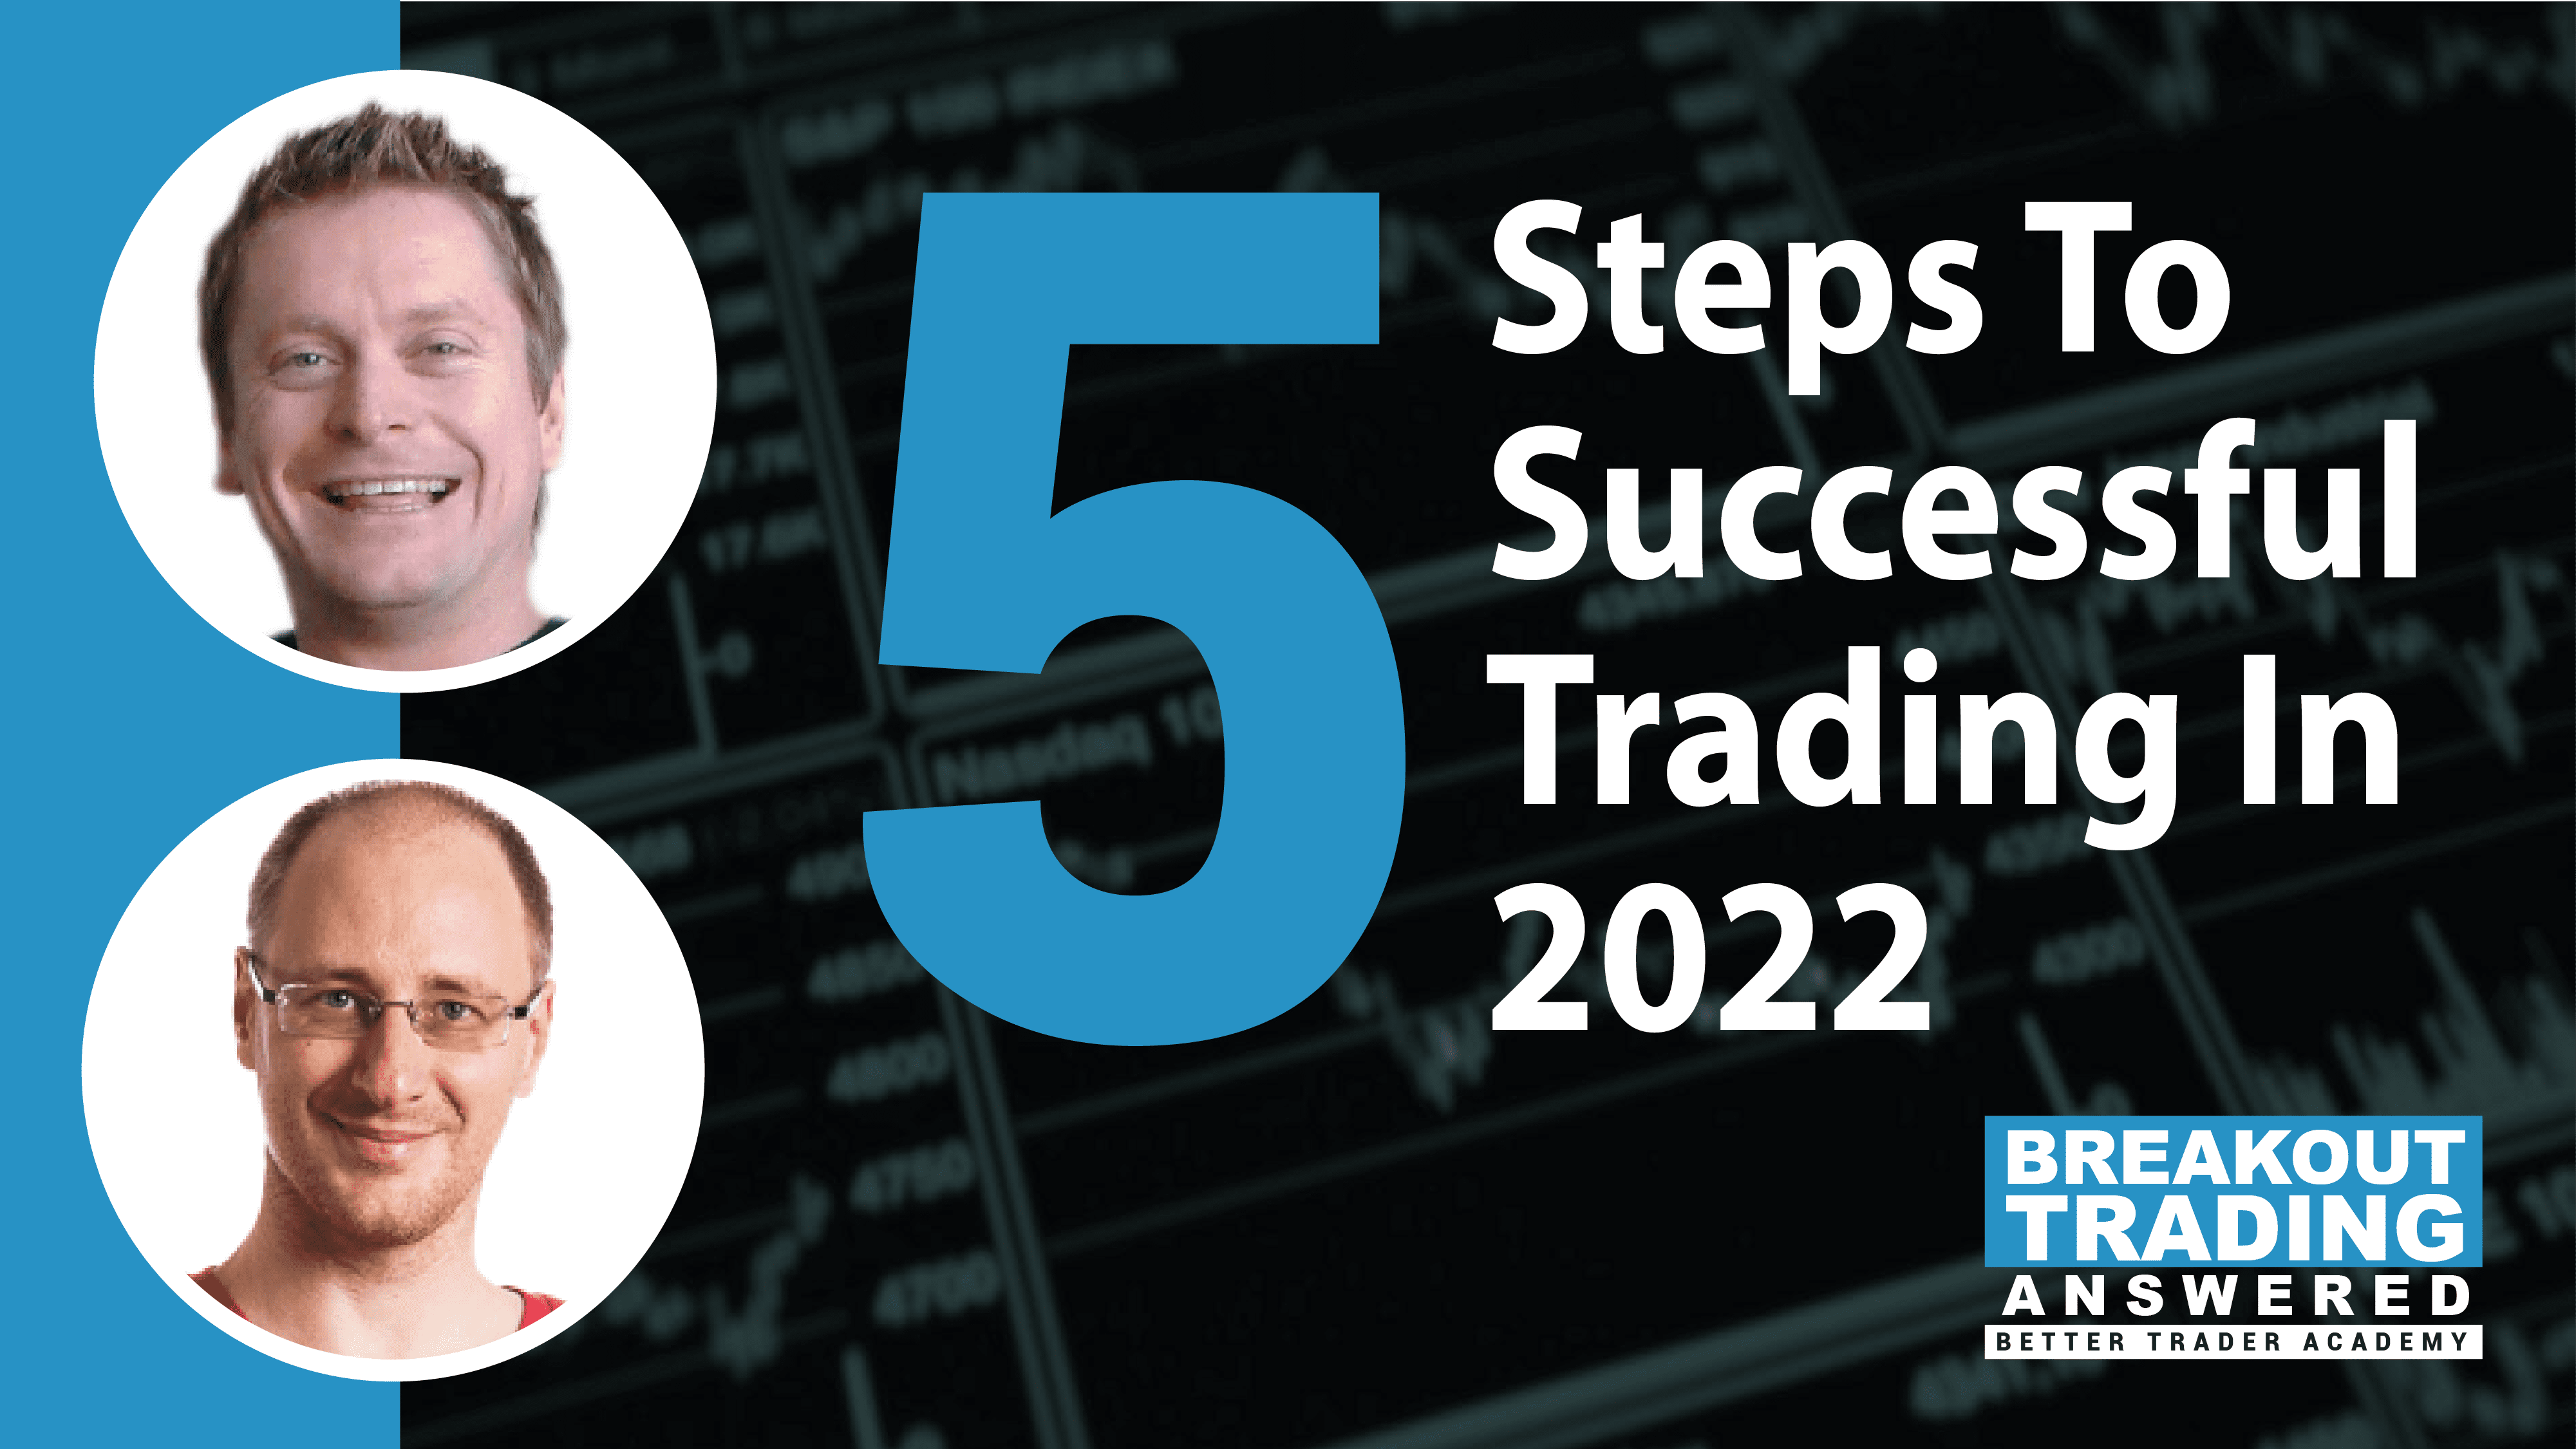 5 Steps to Successful Trading in 2022